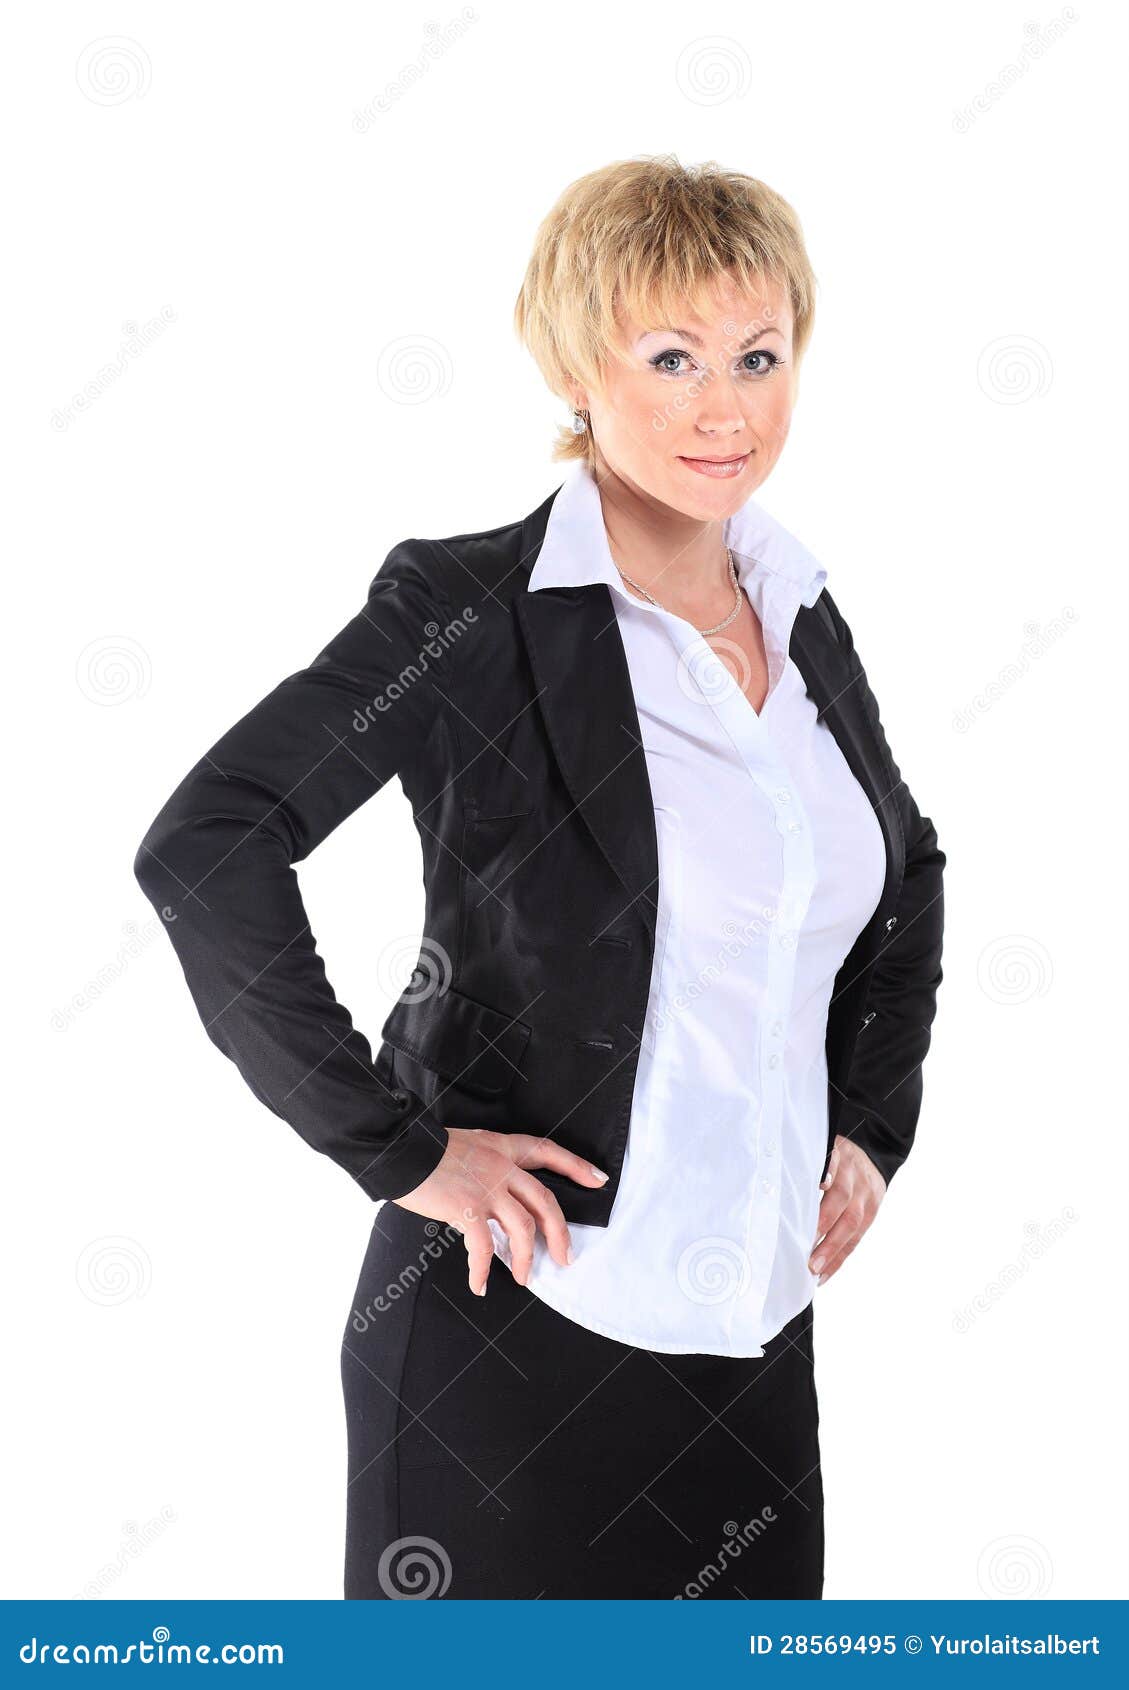 Business Woman In Her 40s Royalty Free Stock Photo - Image: 28569495